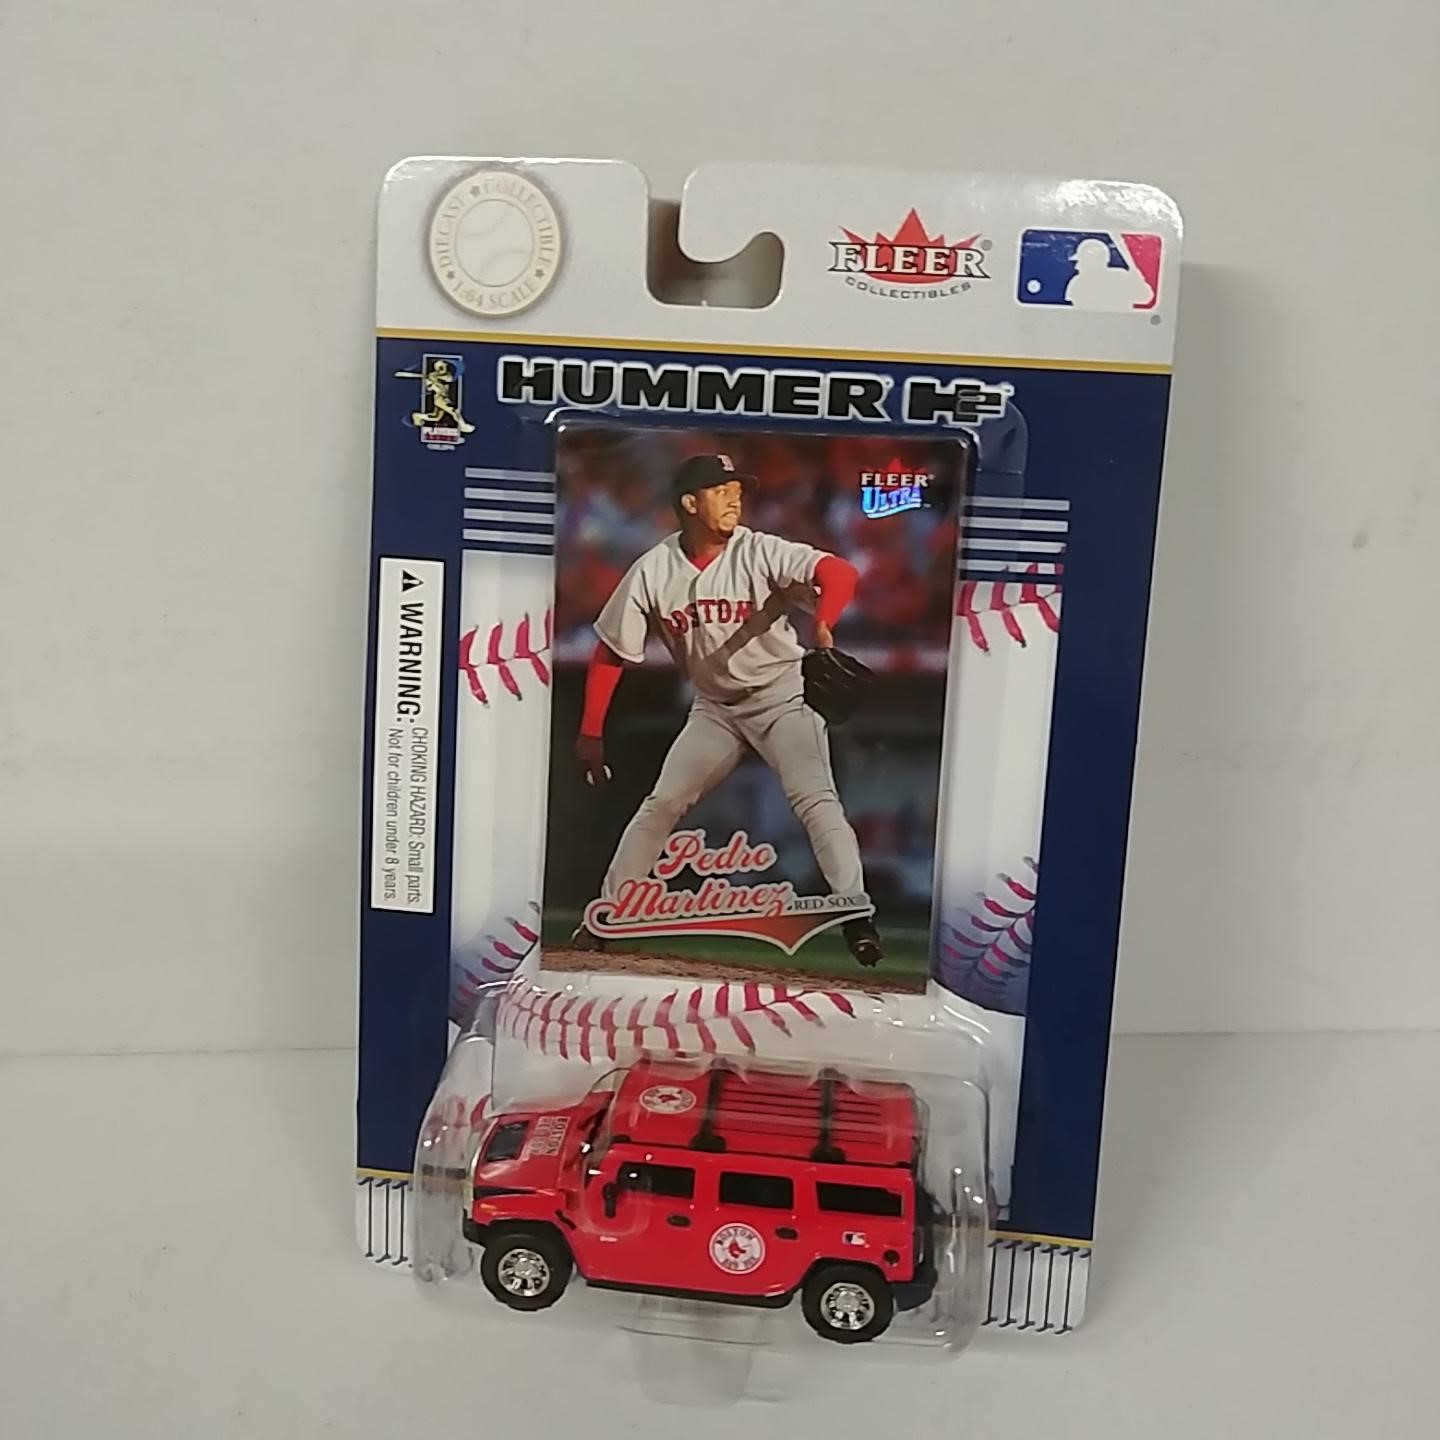 2004 Boston Red Sox 1/64th Hummer with Pedro Martinez trading card